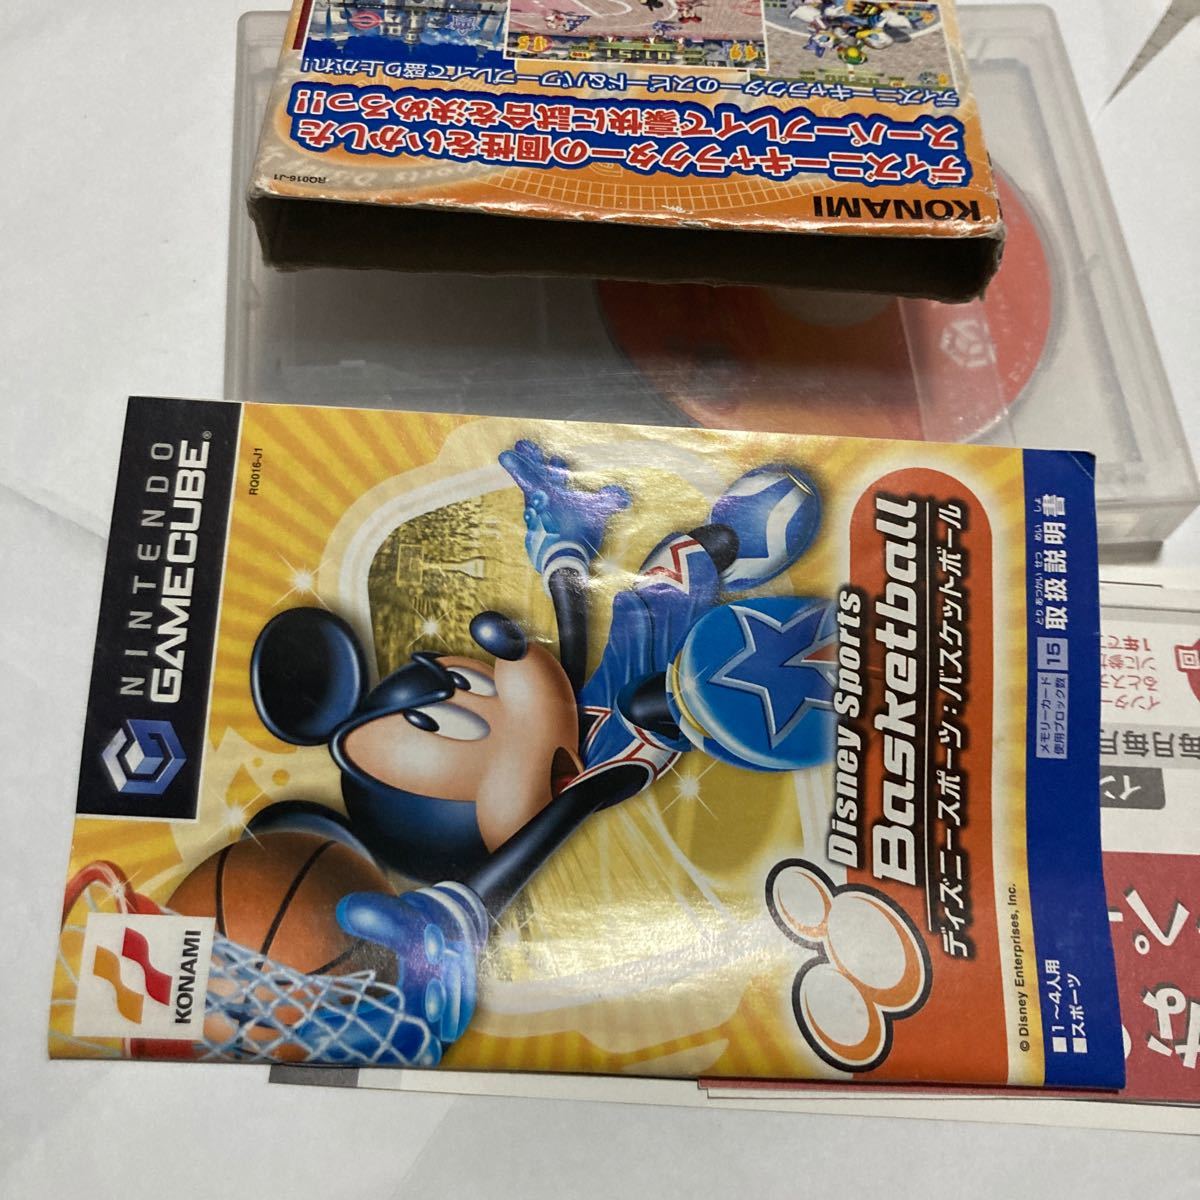  free shipping GG Game Cube Disney sport basketball post card etc. attached NINTENDO GAMECUBE Disney Sports Basketball nintendo 